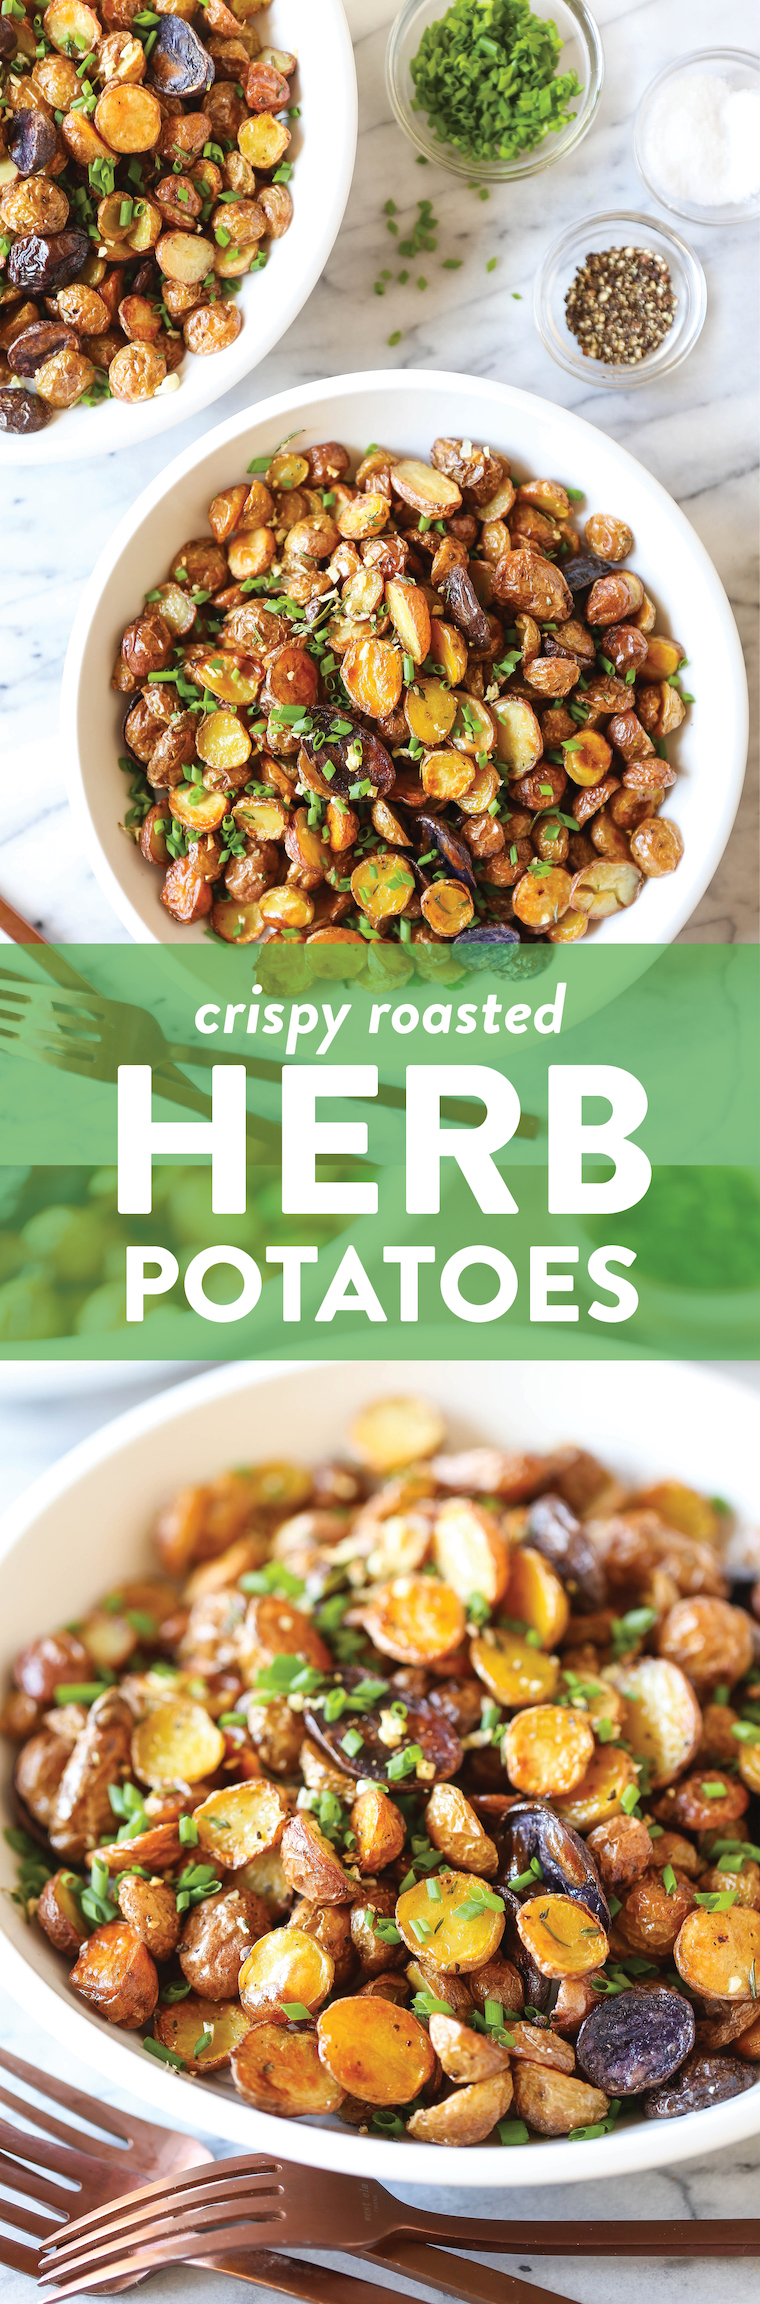 Crispy Roasted Herb Potatoes - Extra-crispy roasted potatoes! It's the perfect side dish to any meal with only 15 min prep and the shortest ingredient list!